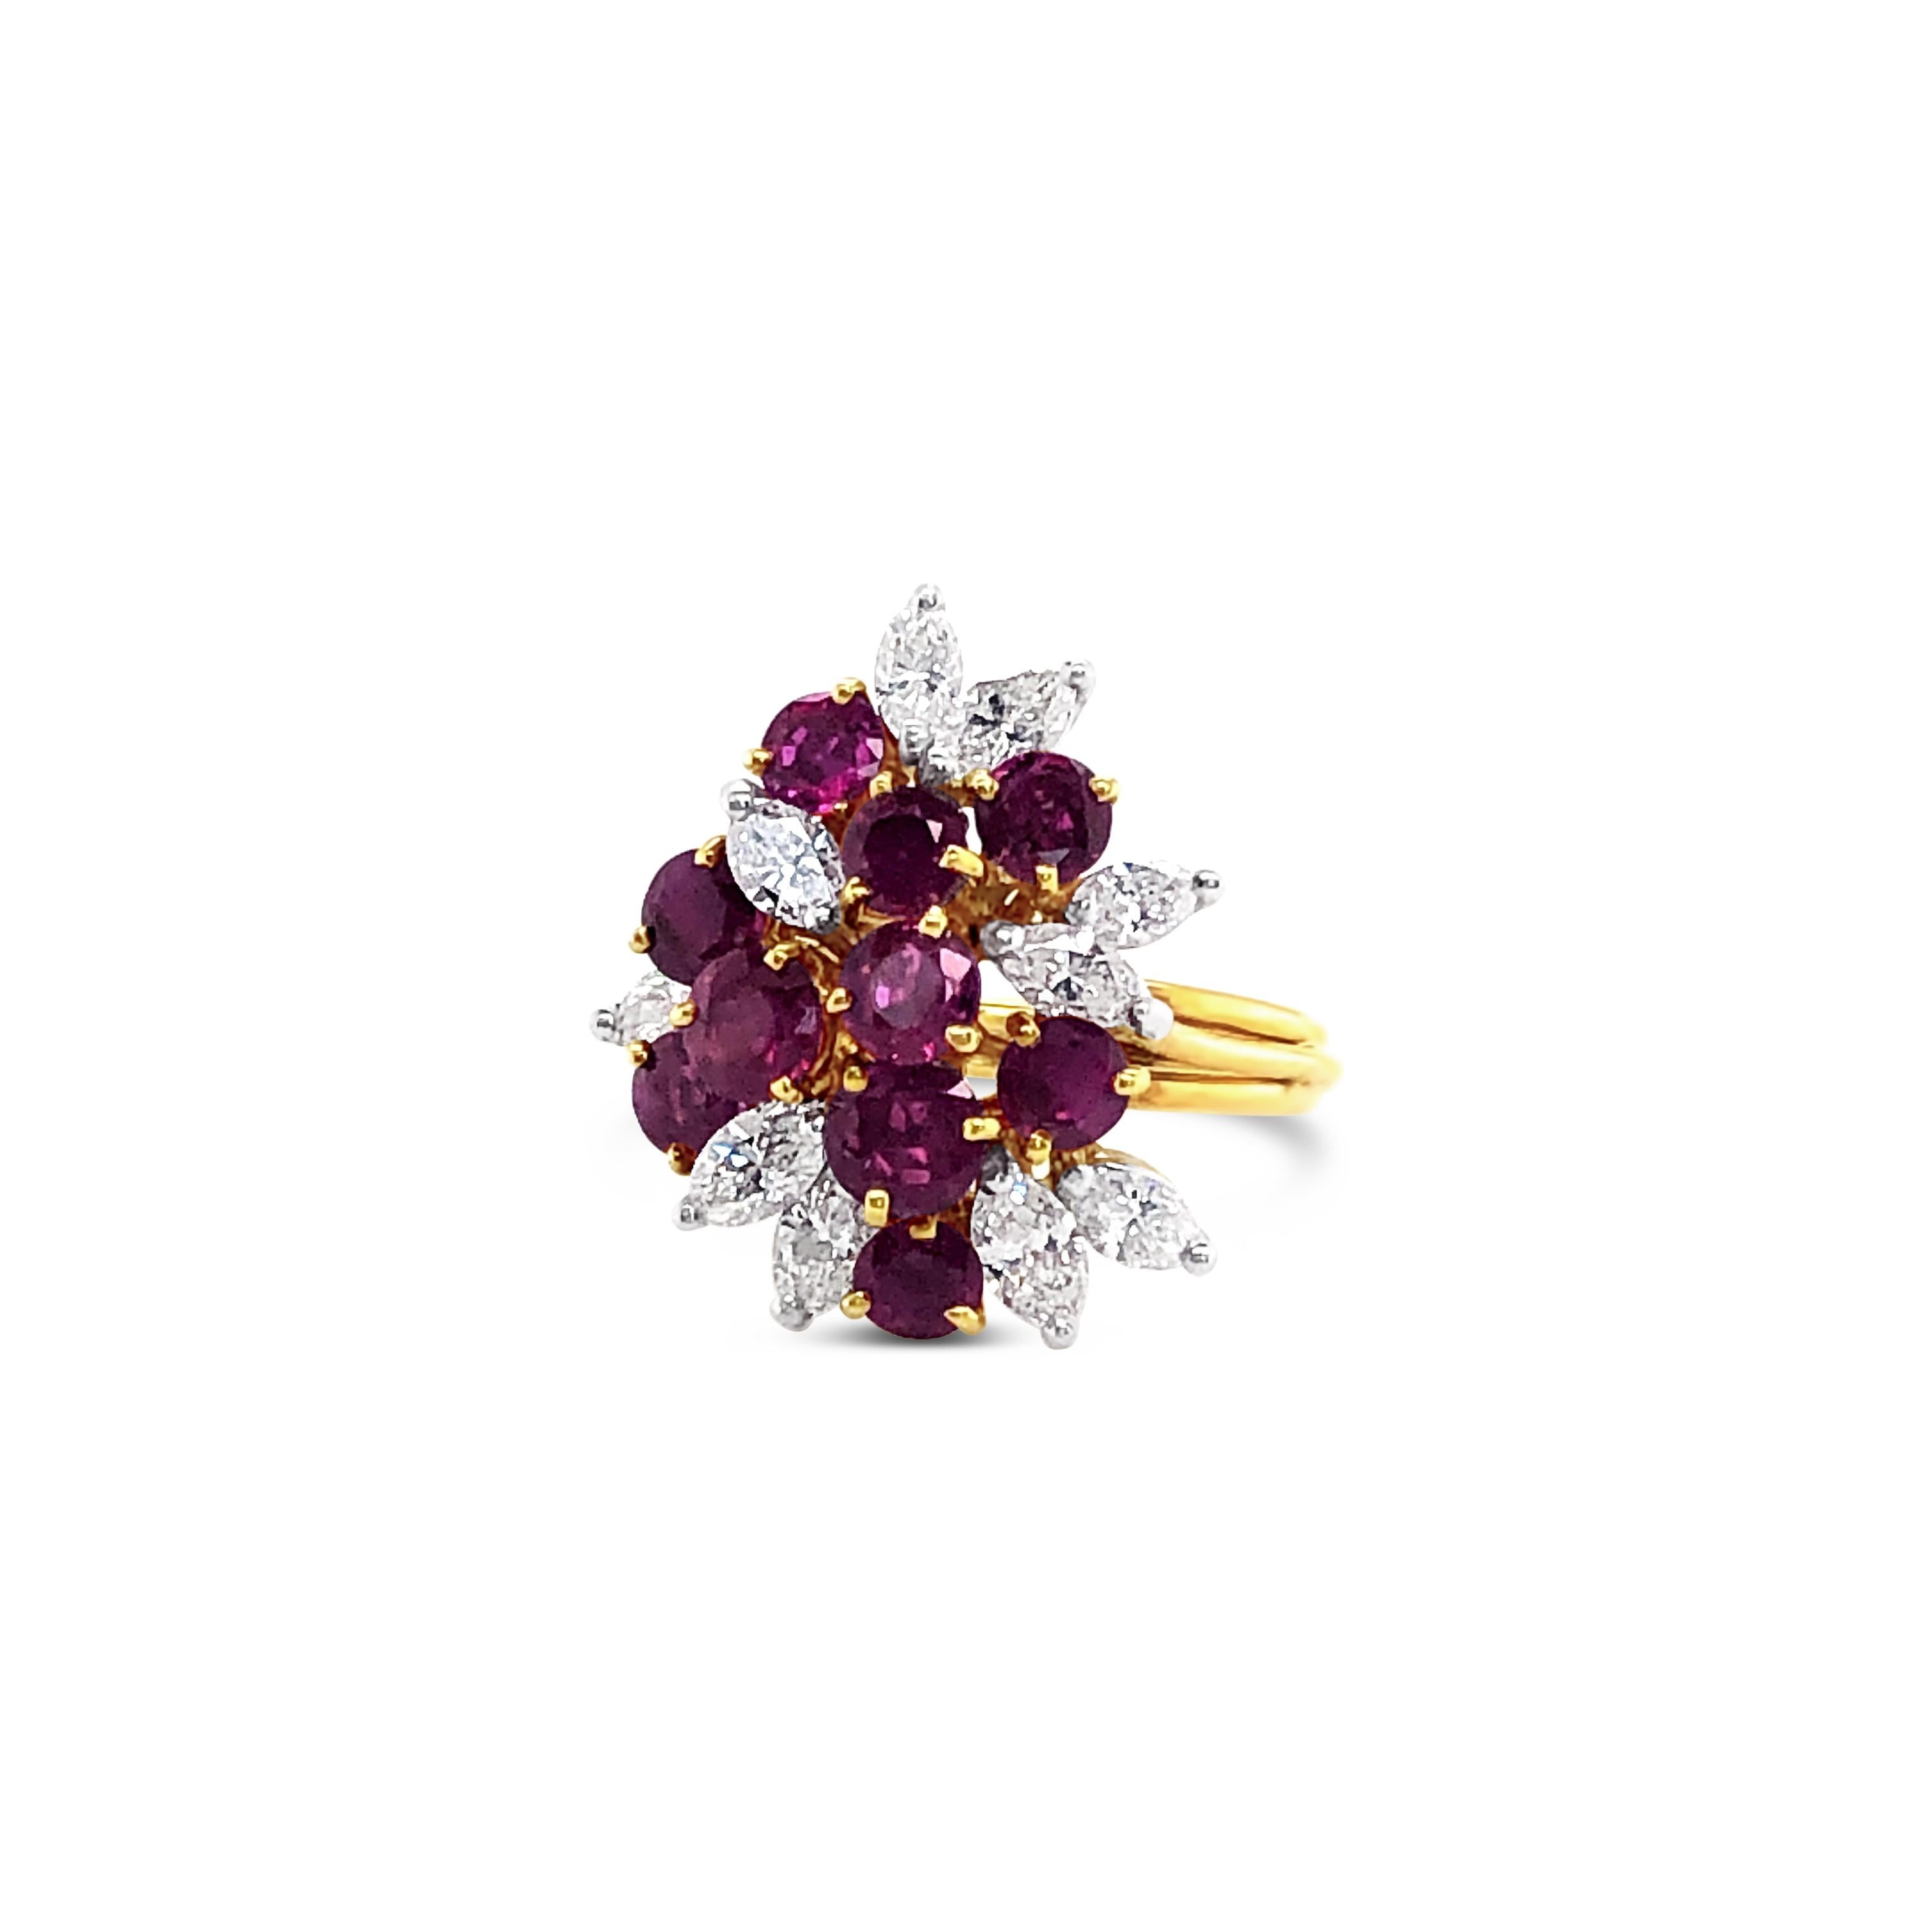 2.88 Carat 'total weight' Ruby and Diamond Cluster Ring in 18 Karat Yellow Gold In Excellent Condition For Sale In Palm Beach, FL